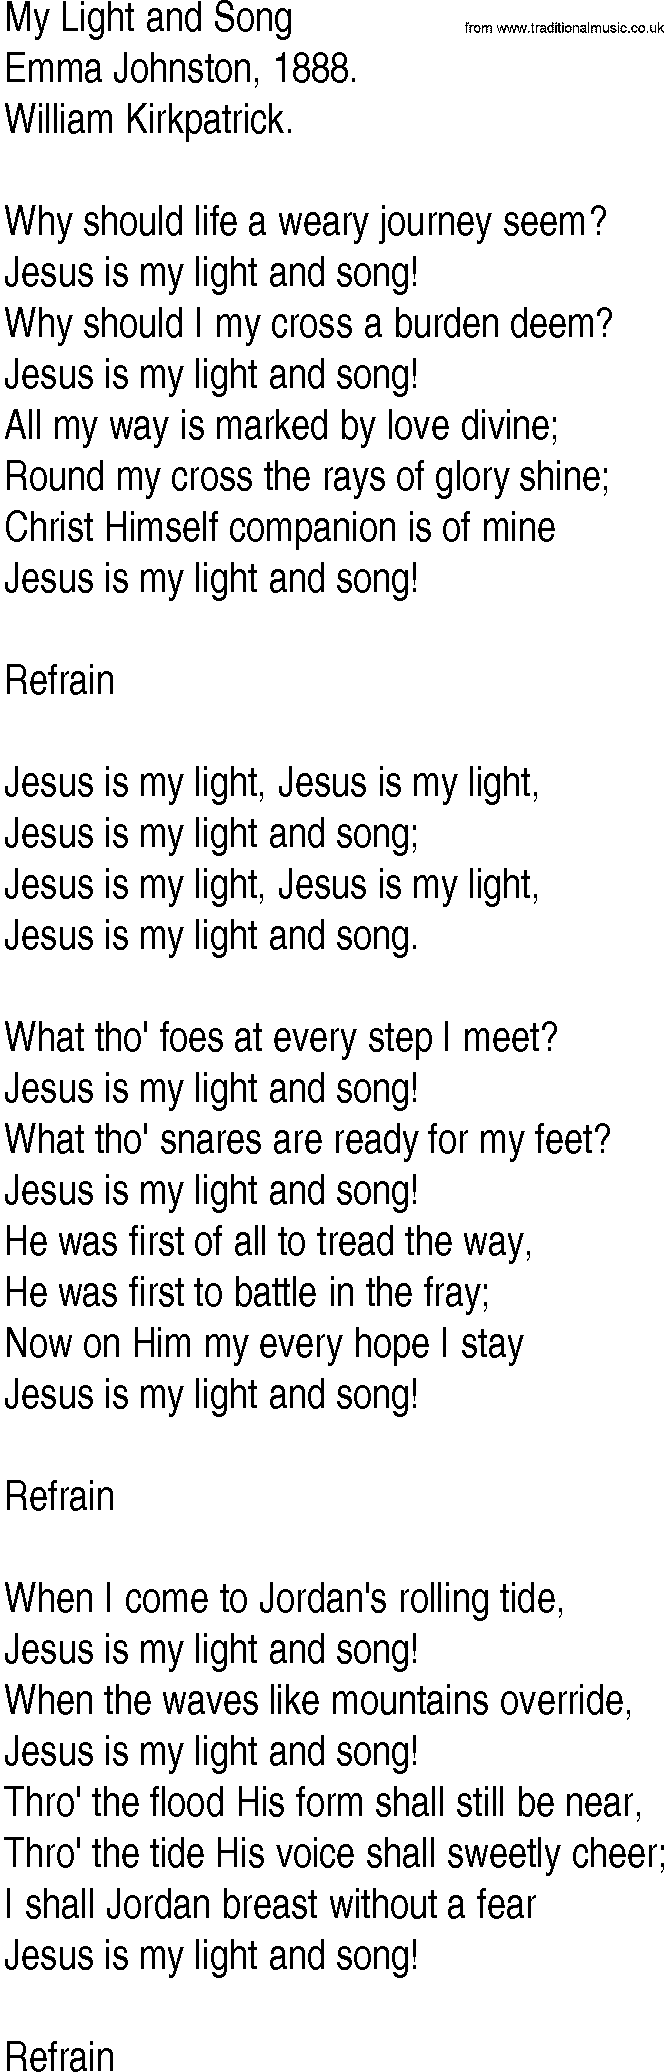 Hymn and Gospel Song: My Light and Song by Emma Johnston lyrics